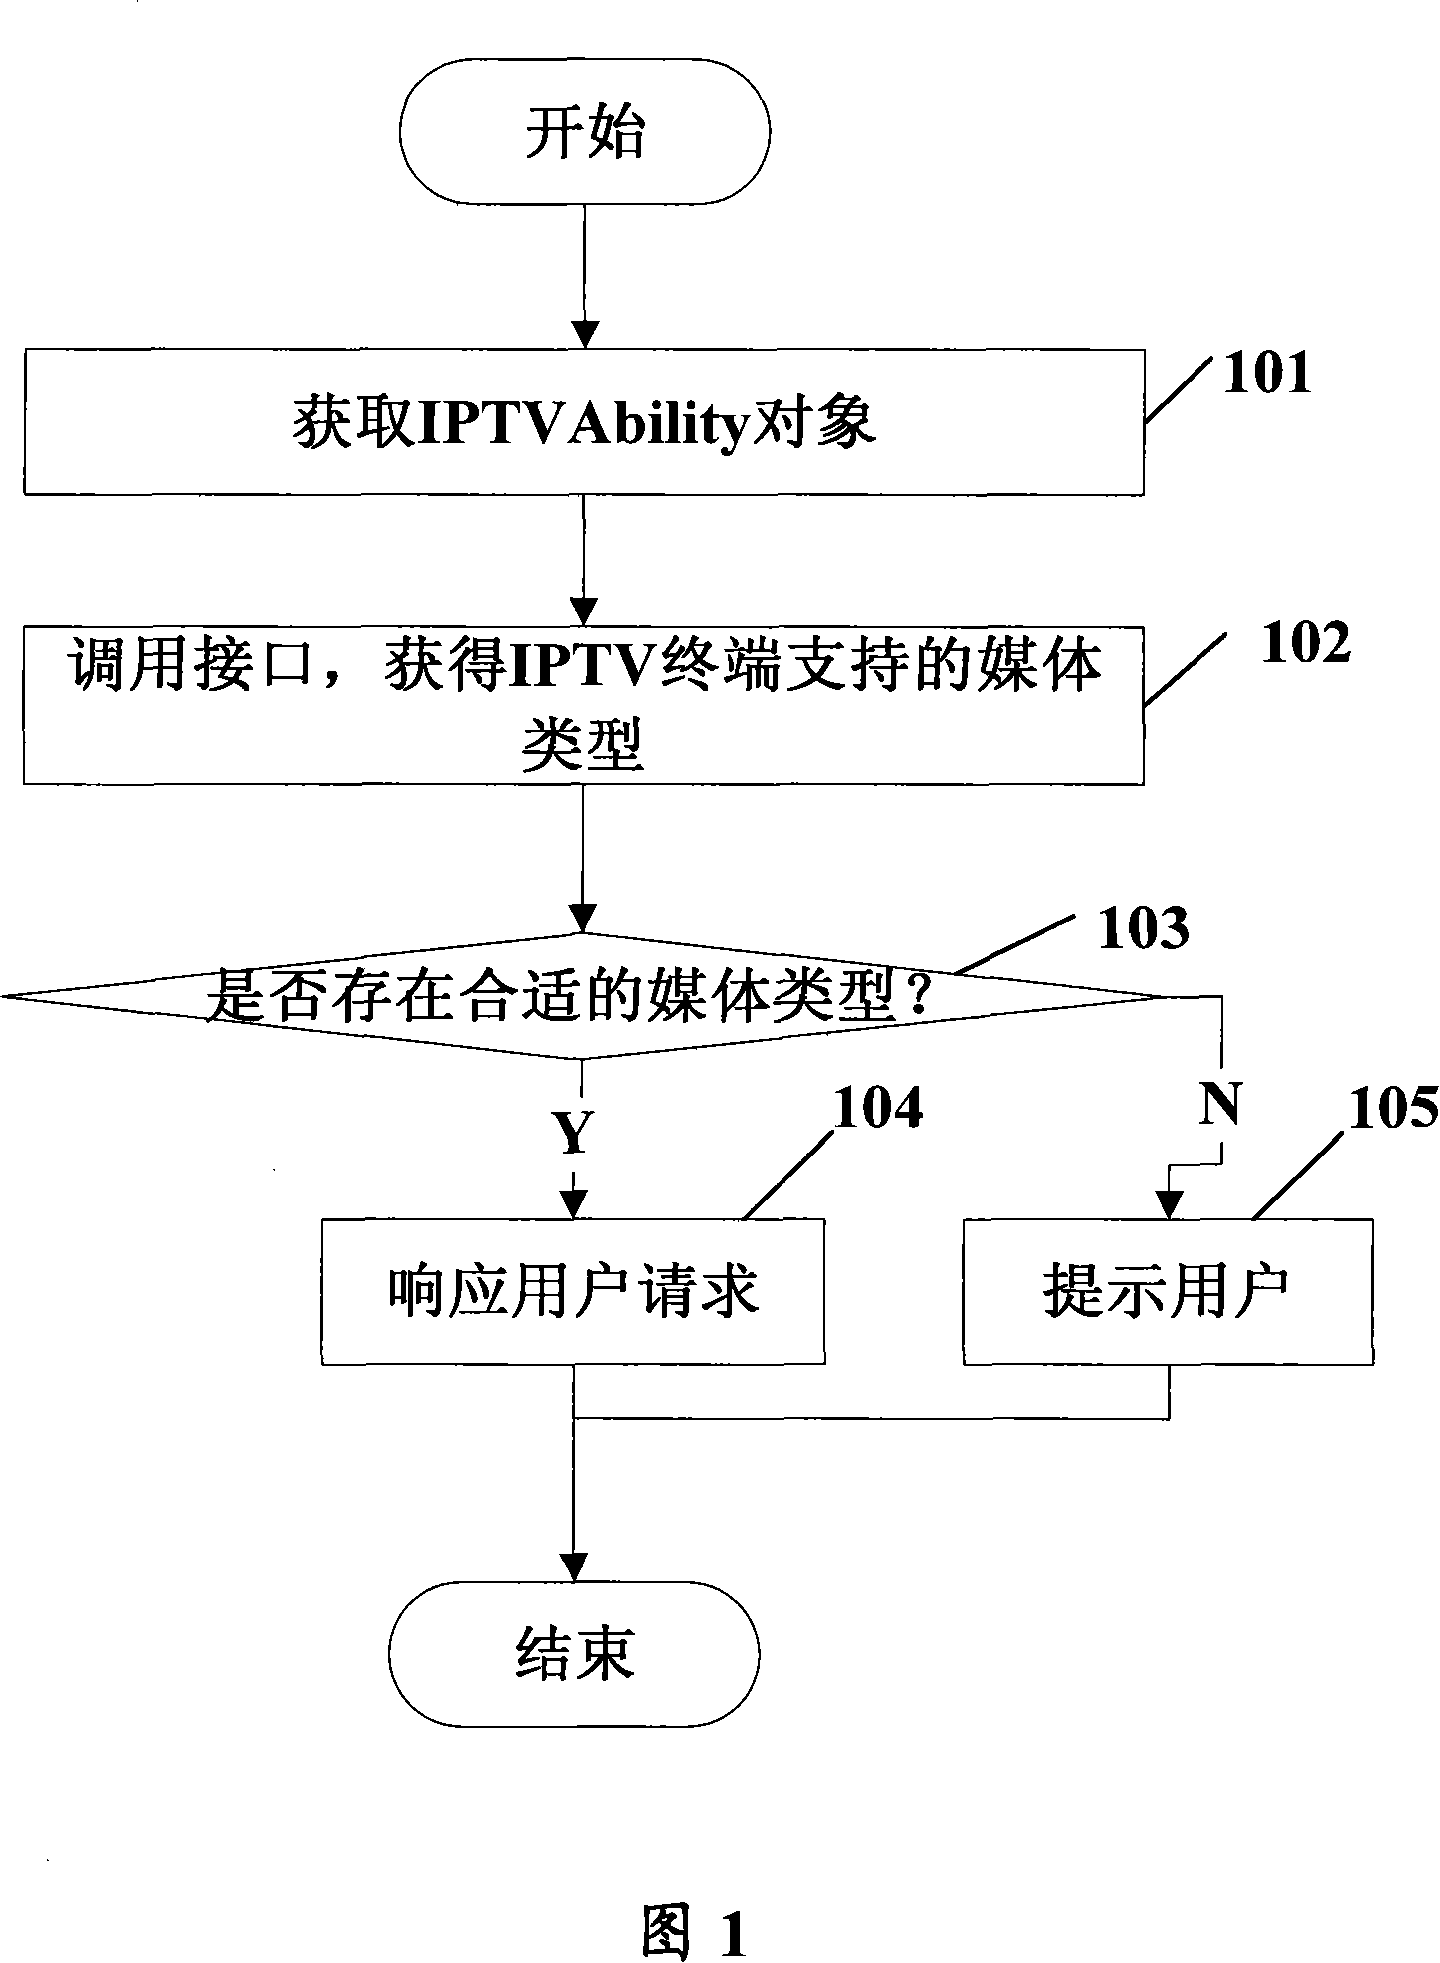 Method and system for extending network television terminal function based on software